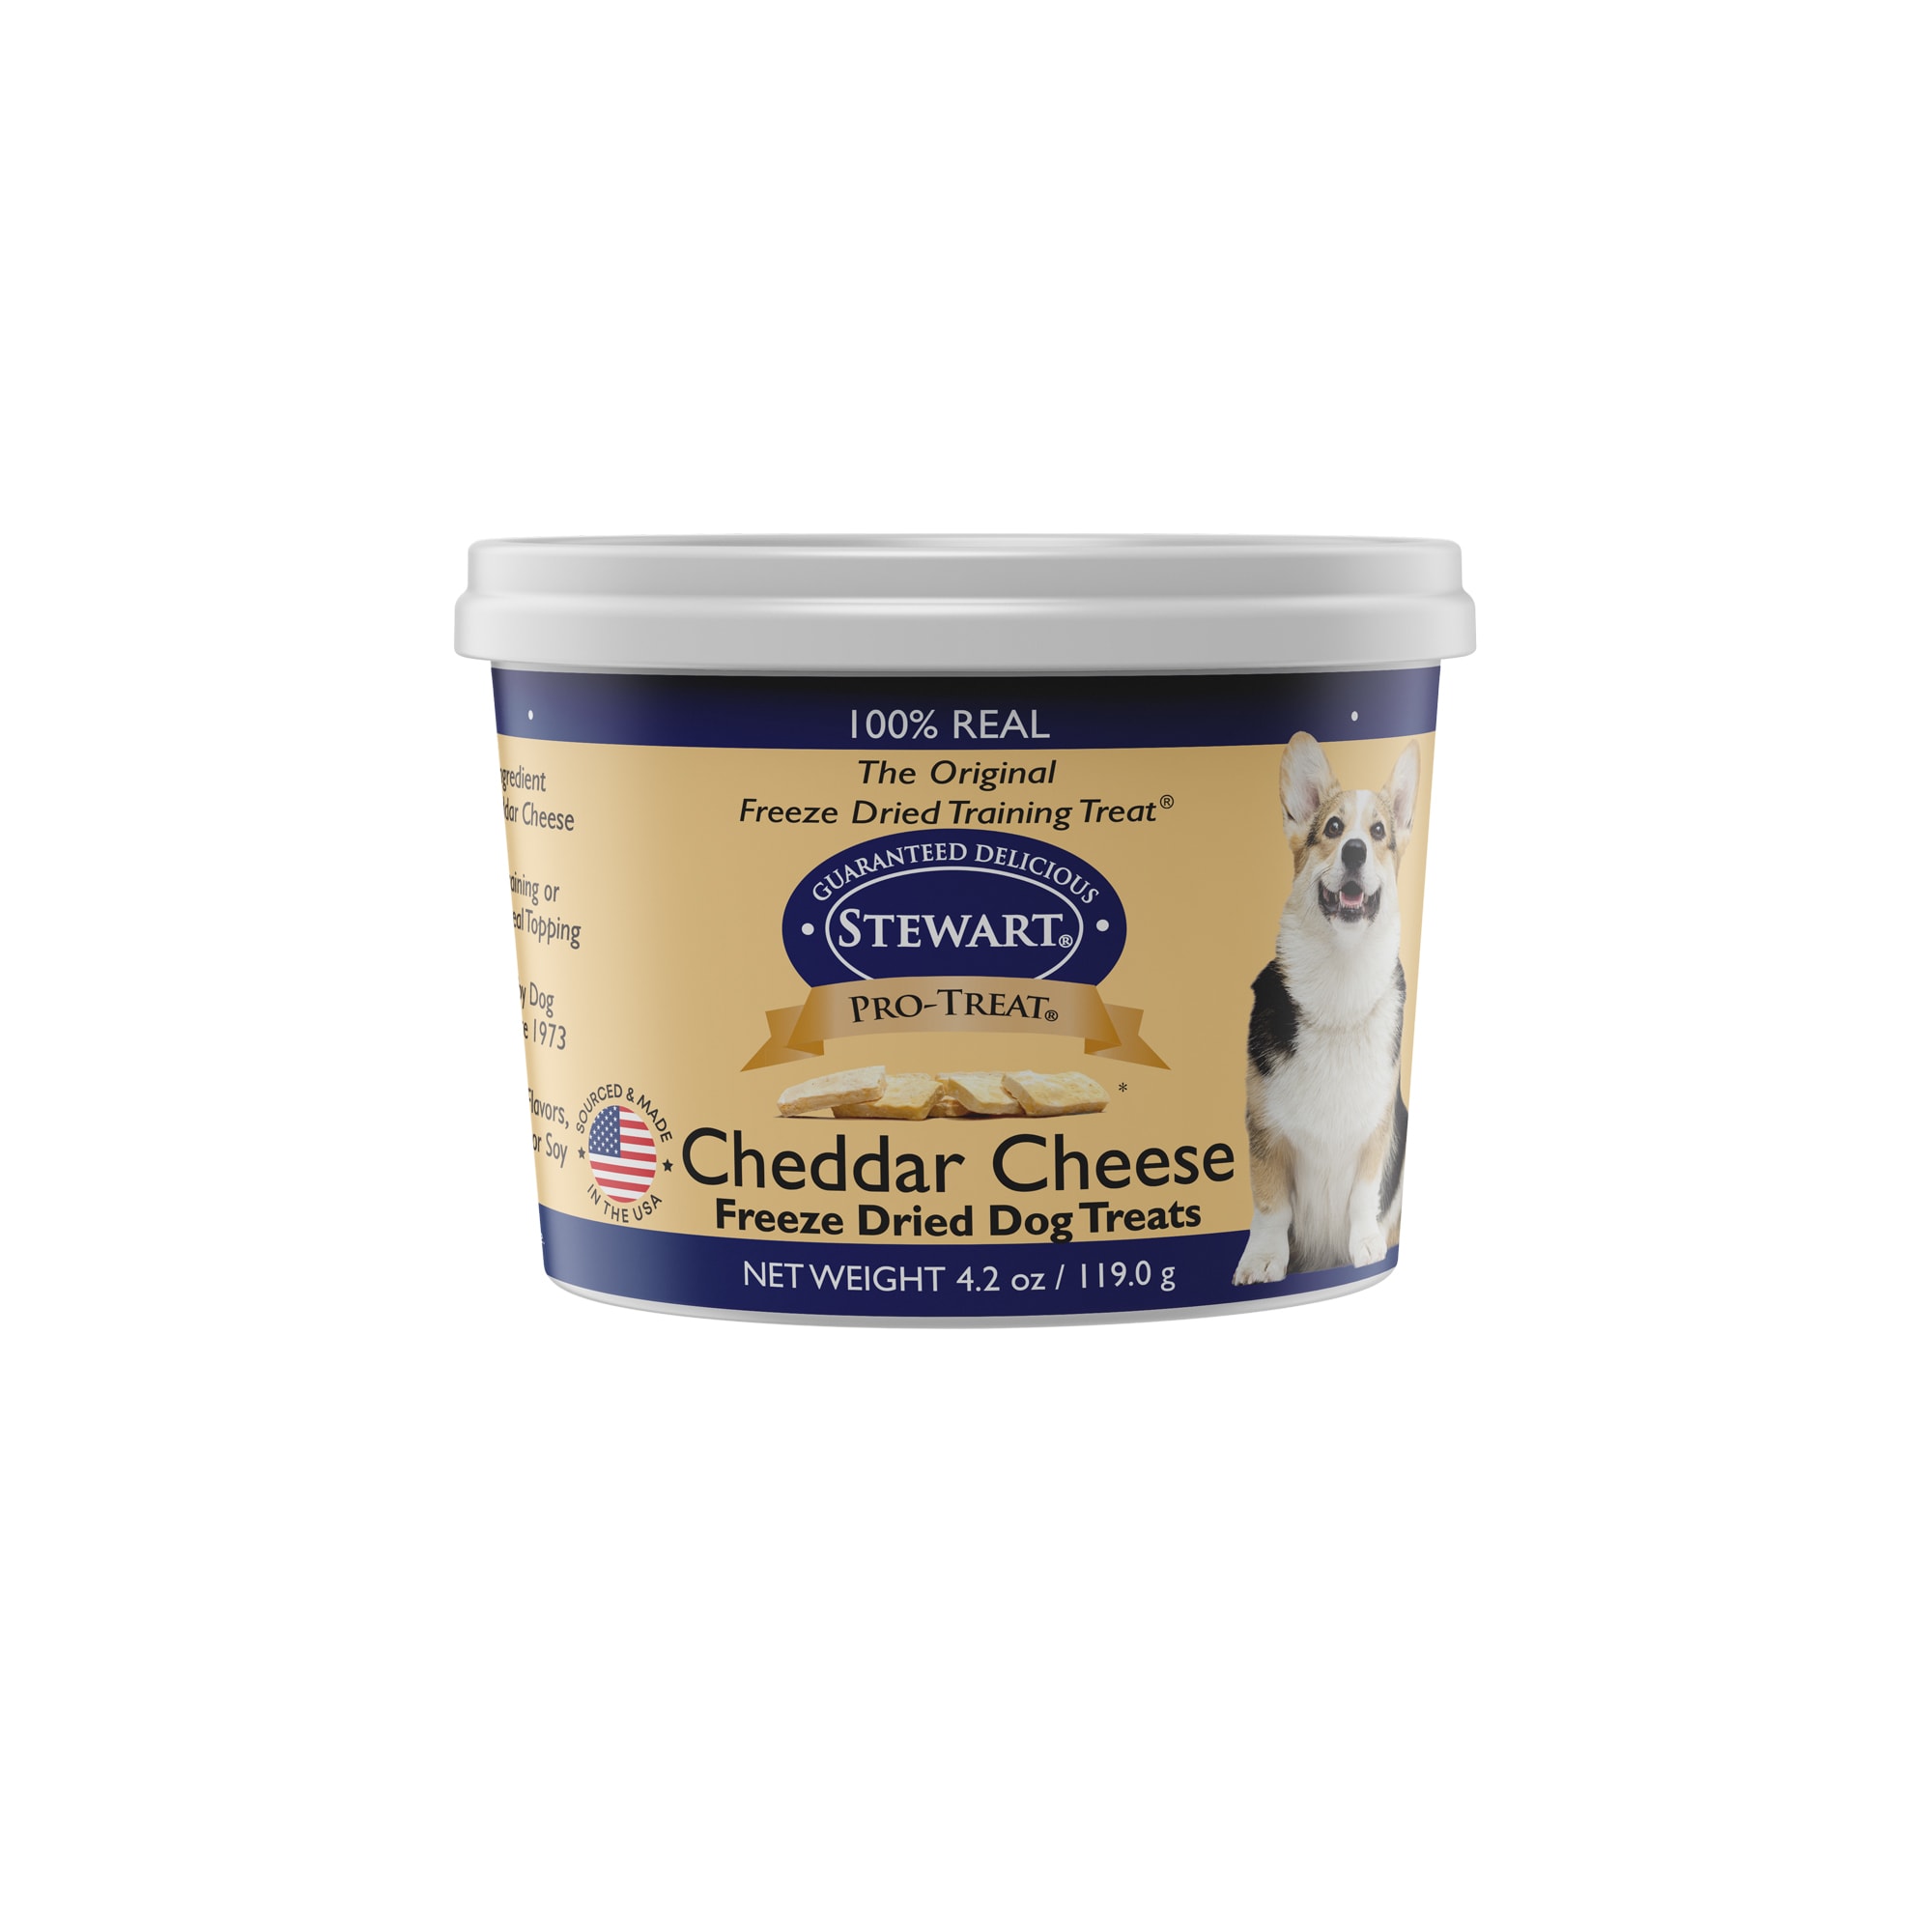 UPC 073101002150 product image for Stewart Cheddar Cheese Freeze Dried Dog Treats, 4.2 oz. | upcitemdb.com